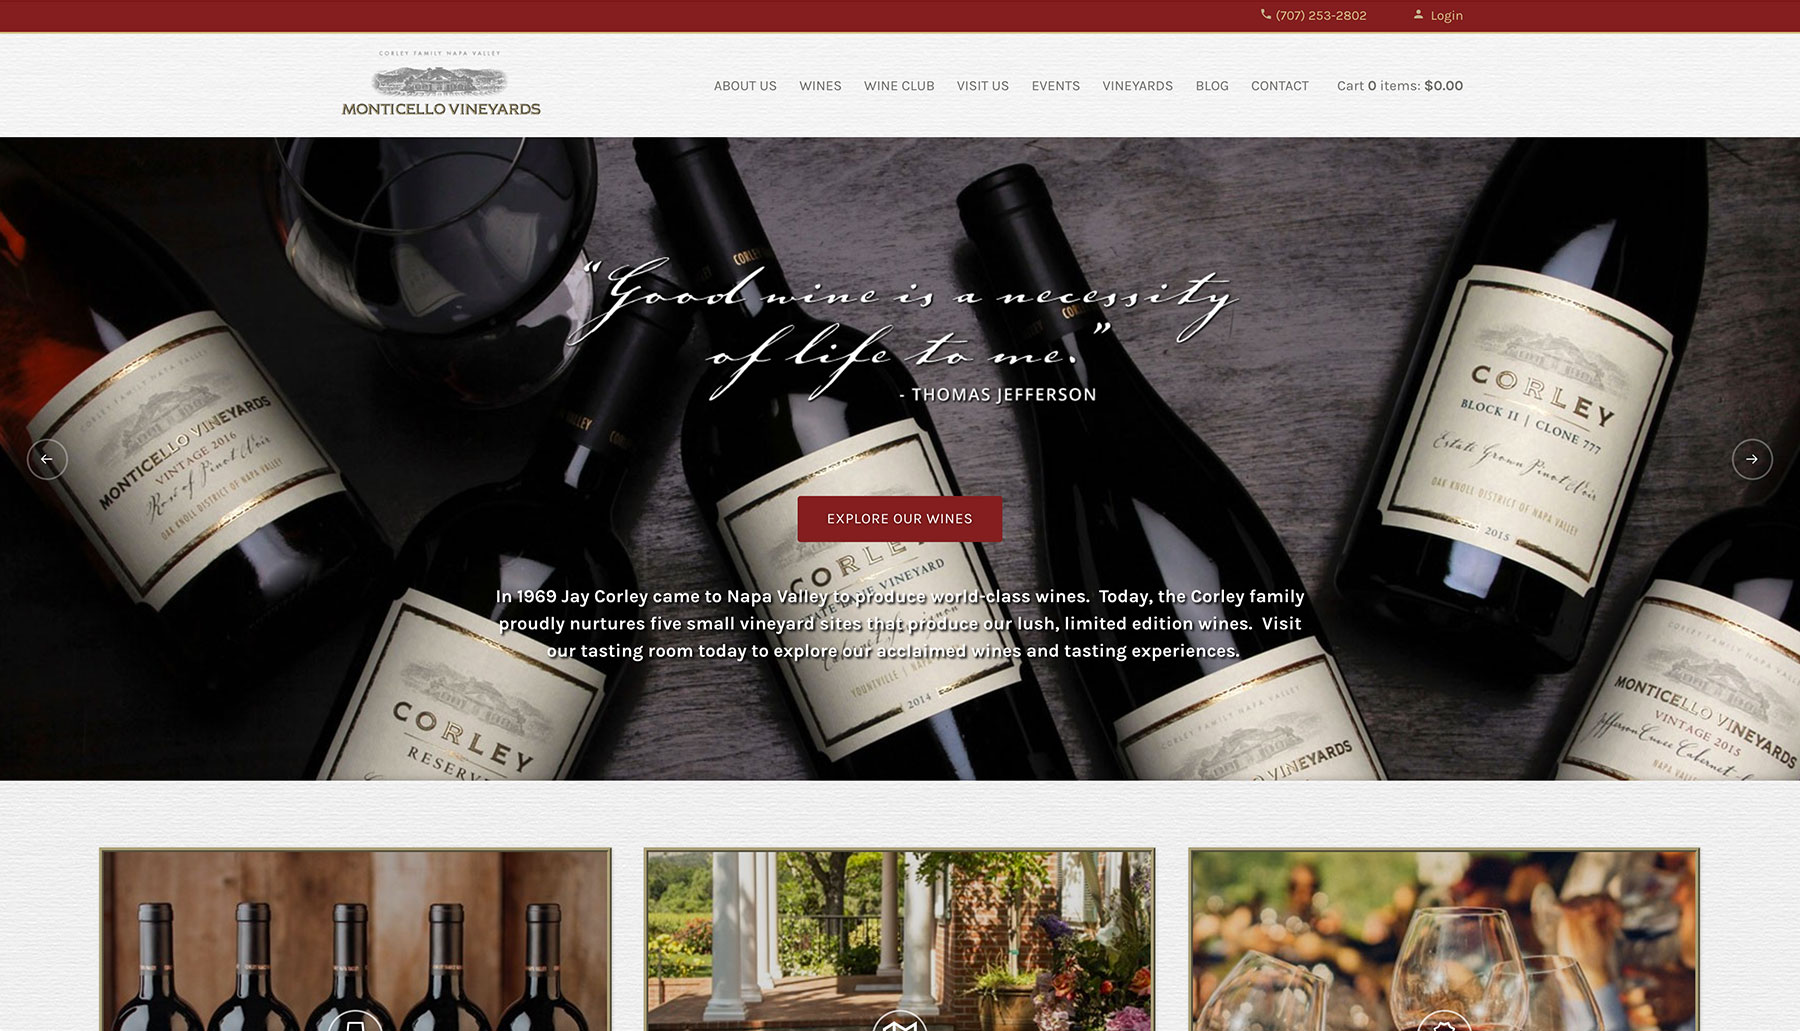 Monticello Vineyards's website, with design elements that recall a bottle of wine.